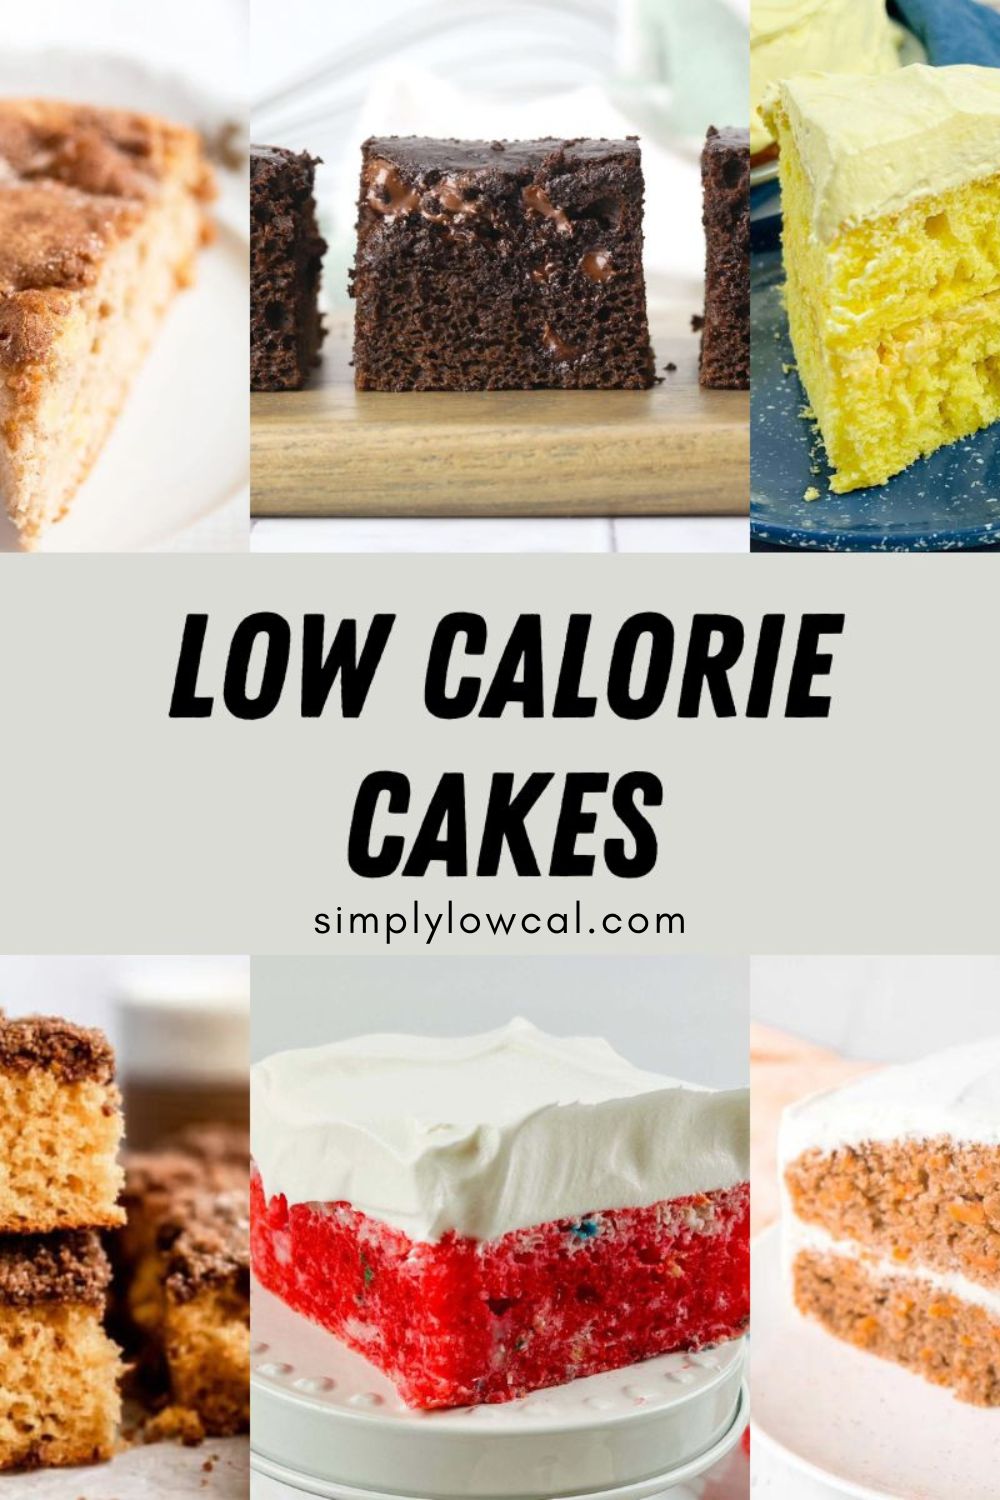 Pinterest pin of low calorie cakes.